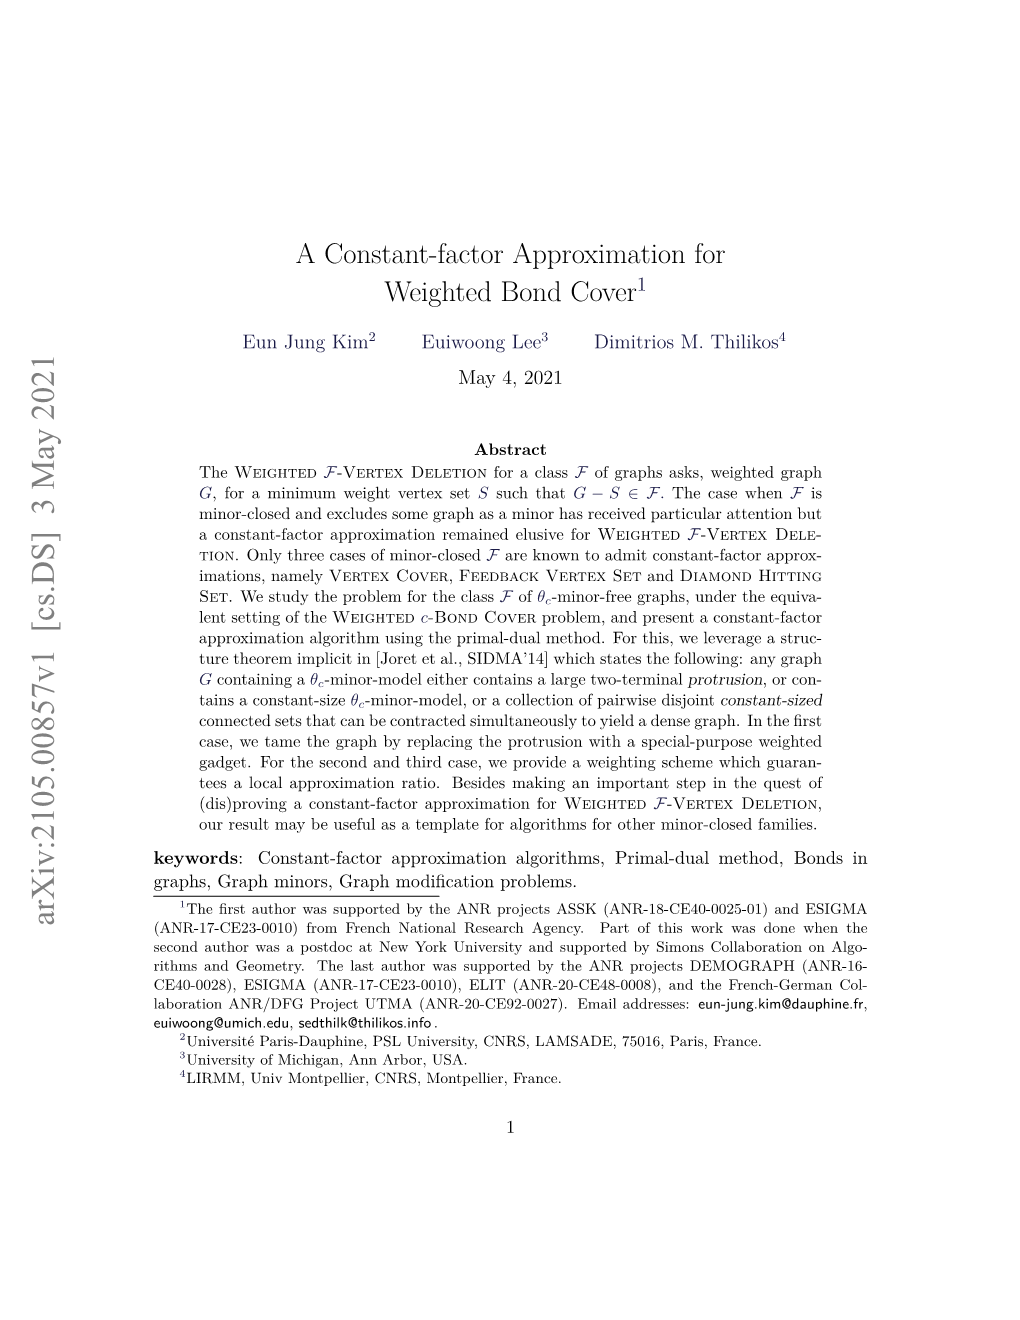 A Constant-Factor Approximation for Weighted Bond Cover1